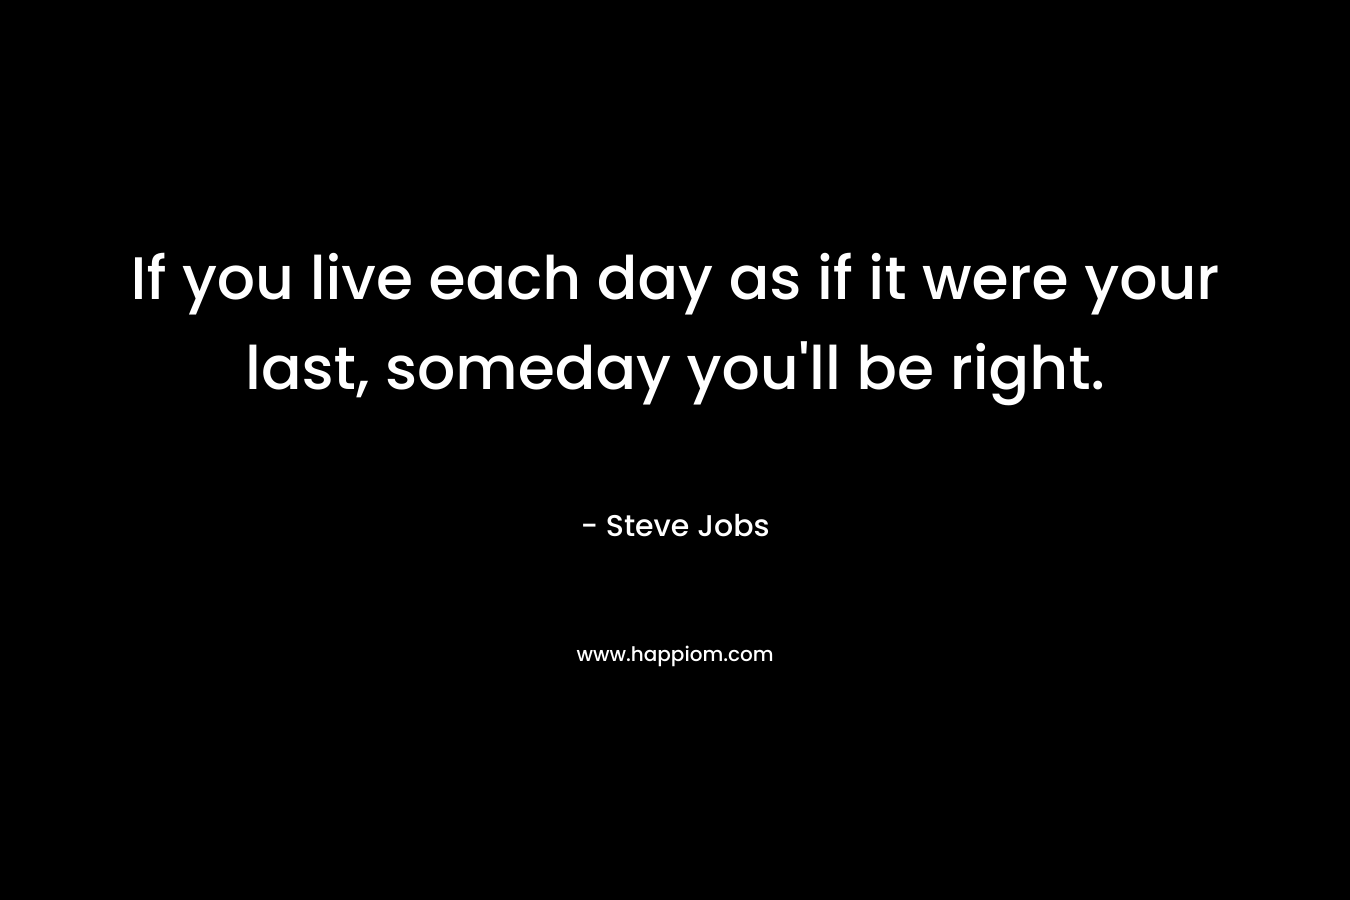 If you live each day as if it were your last, someday you'll be right.